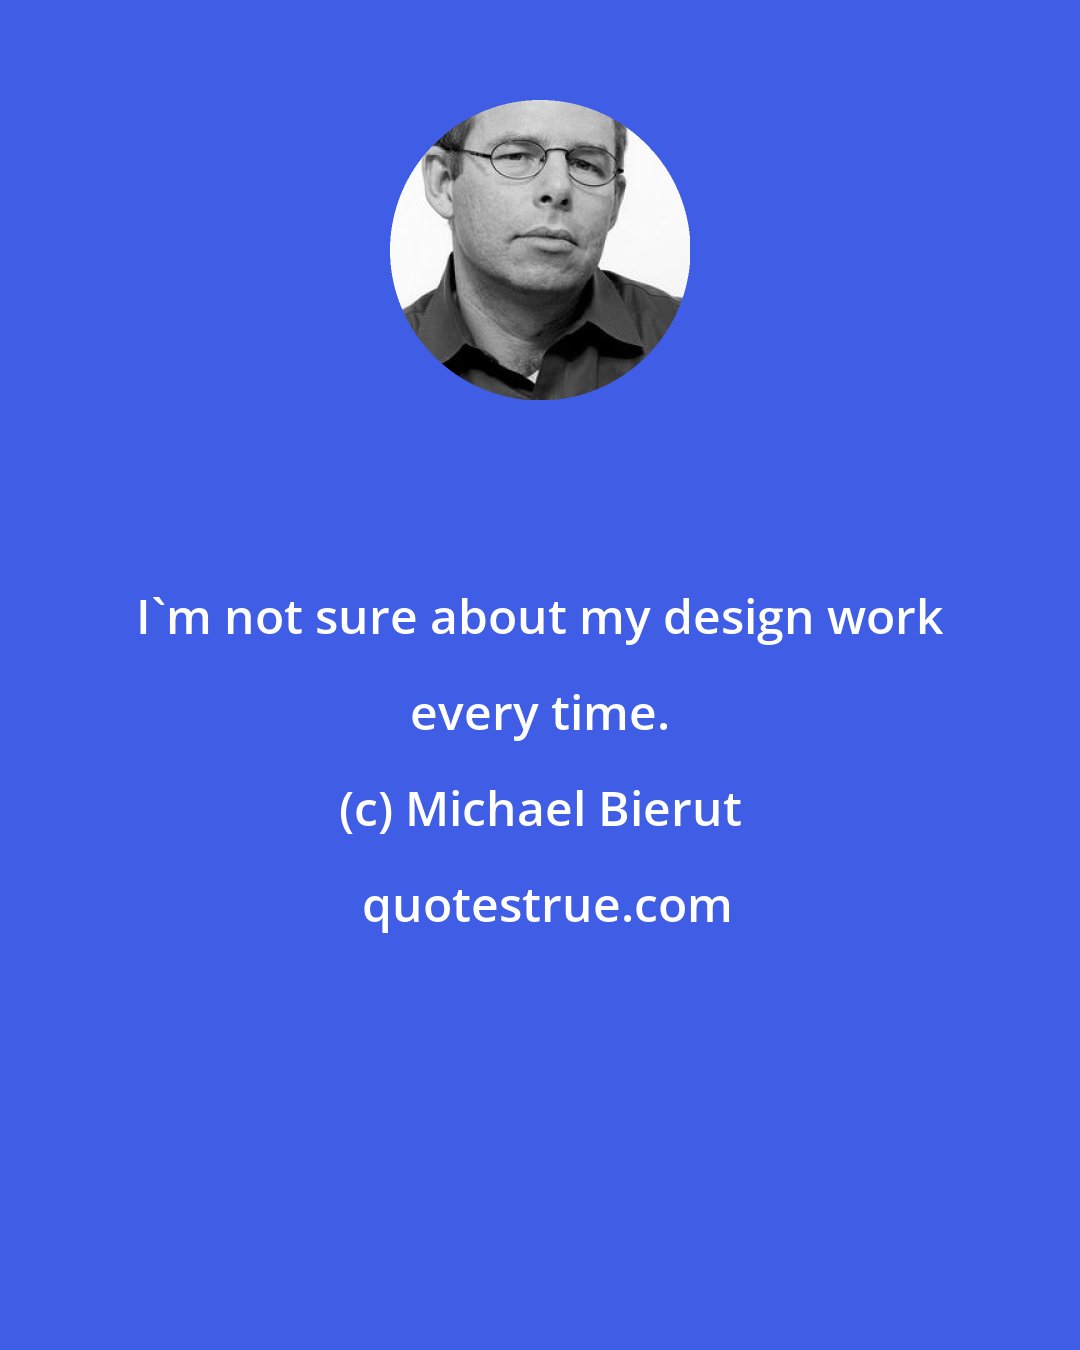 Michael Bierut: I'm not sure about my design work every time.